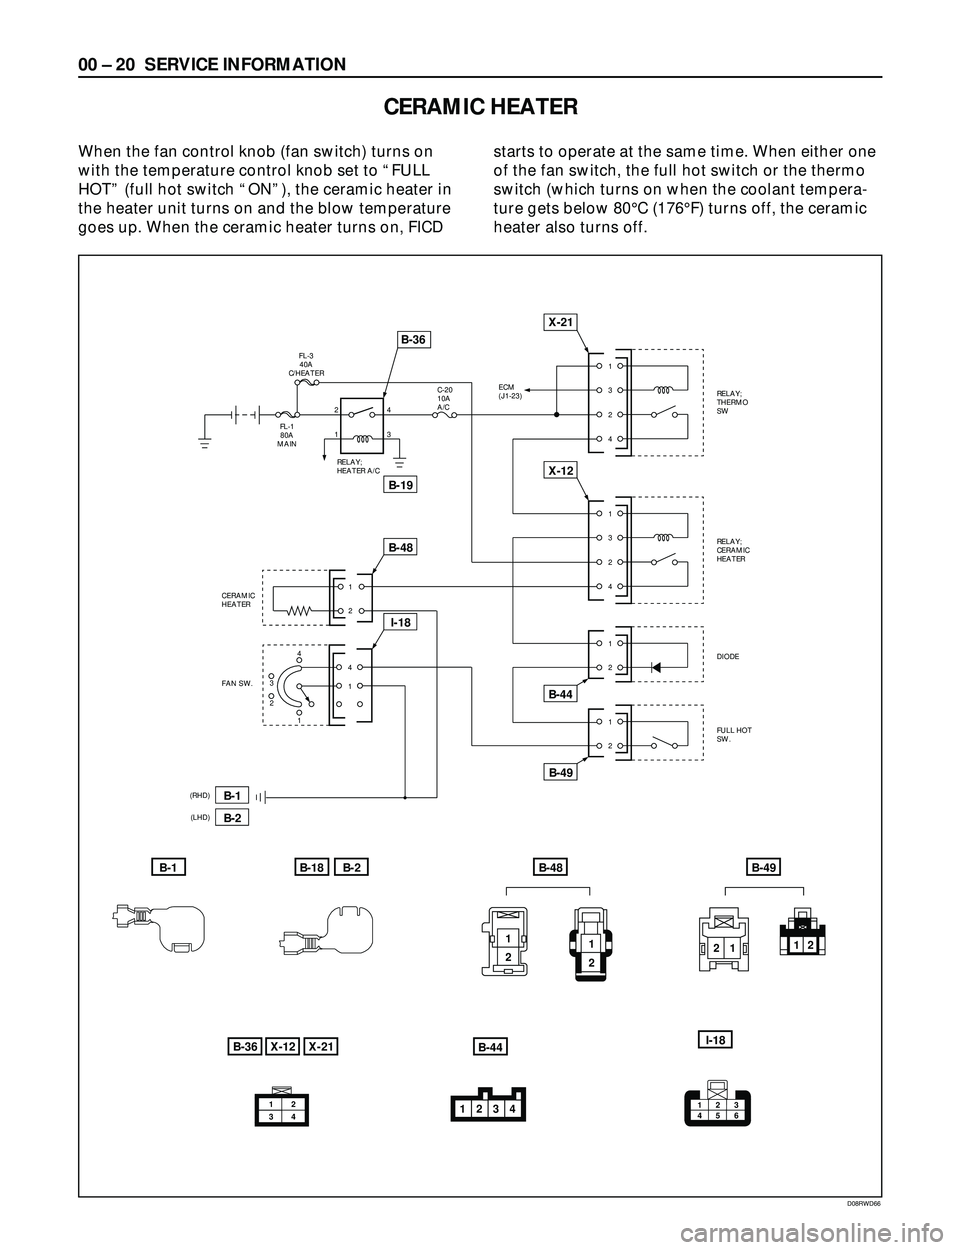 ISUZU TROOPER 1998  Service Repair Manual 00 Ð 20 SERVICE INFORMATION
CERAMIC HEATER
When the fan control knob (fan switch) turns on
with the temperature control knob set to ÒFULL
HOTÓ (full hot switch ÒONÓ), the ceramic heater in
the he